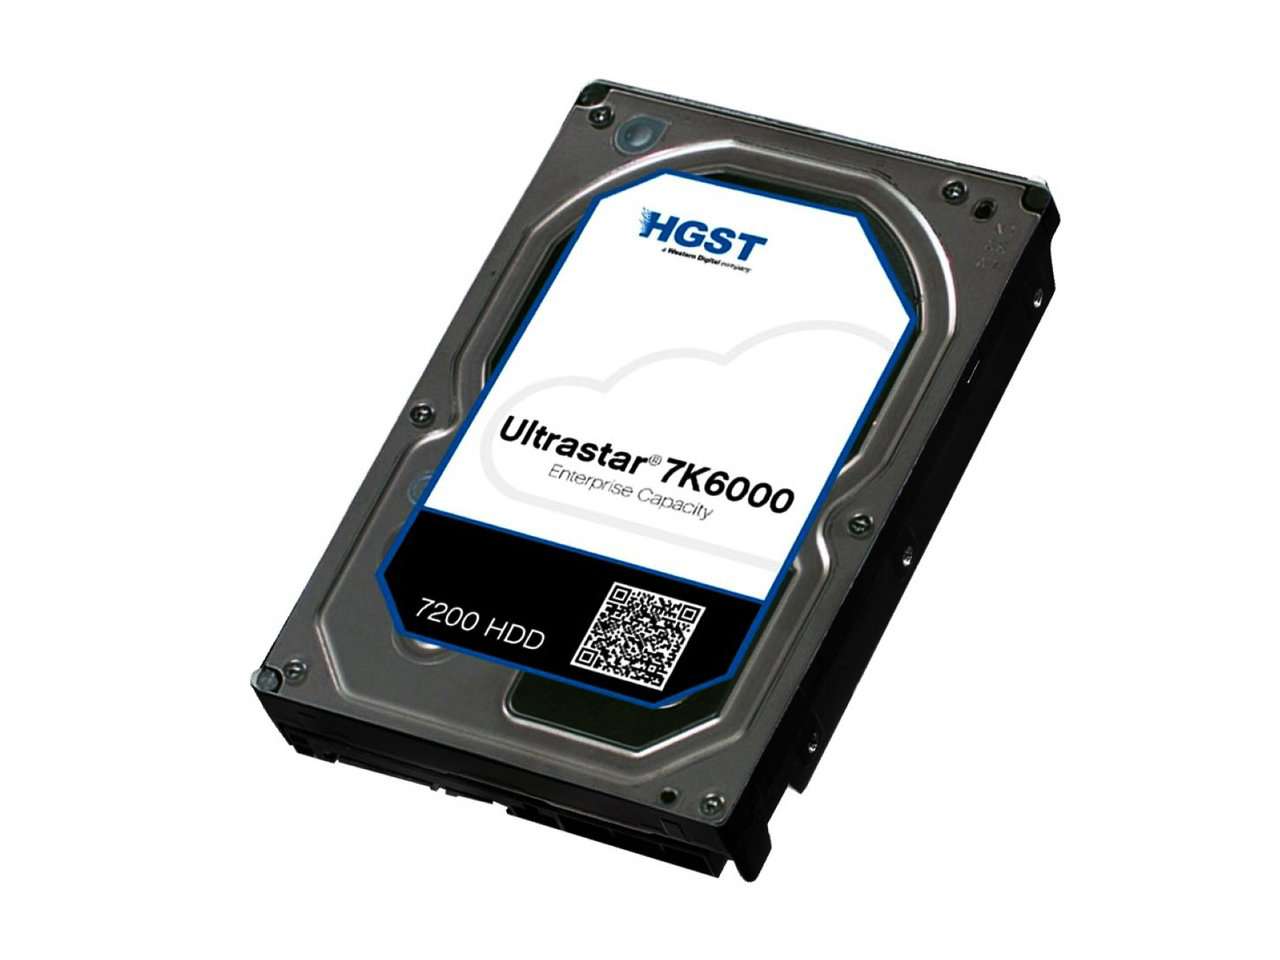 HGST Ultrastar 7K6000 0F22943  HUS726020ALS210 2TB 7.2K RPM SAS 12Gb/s 512n 128MB Cache 3.5" ISE HDD